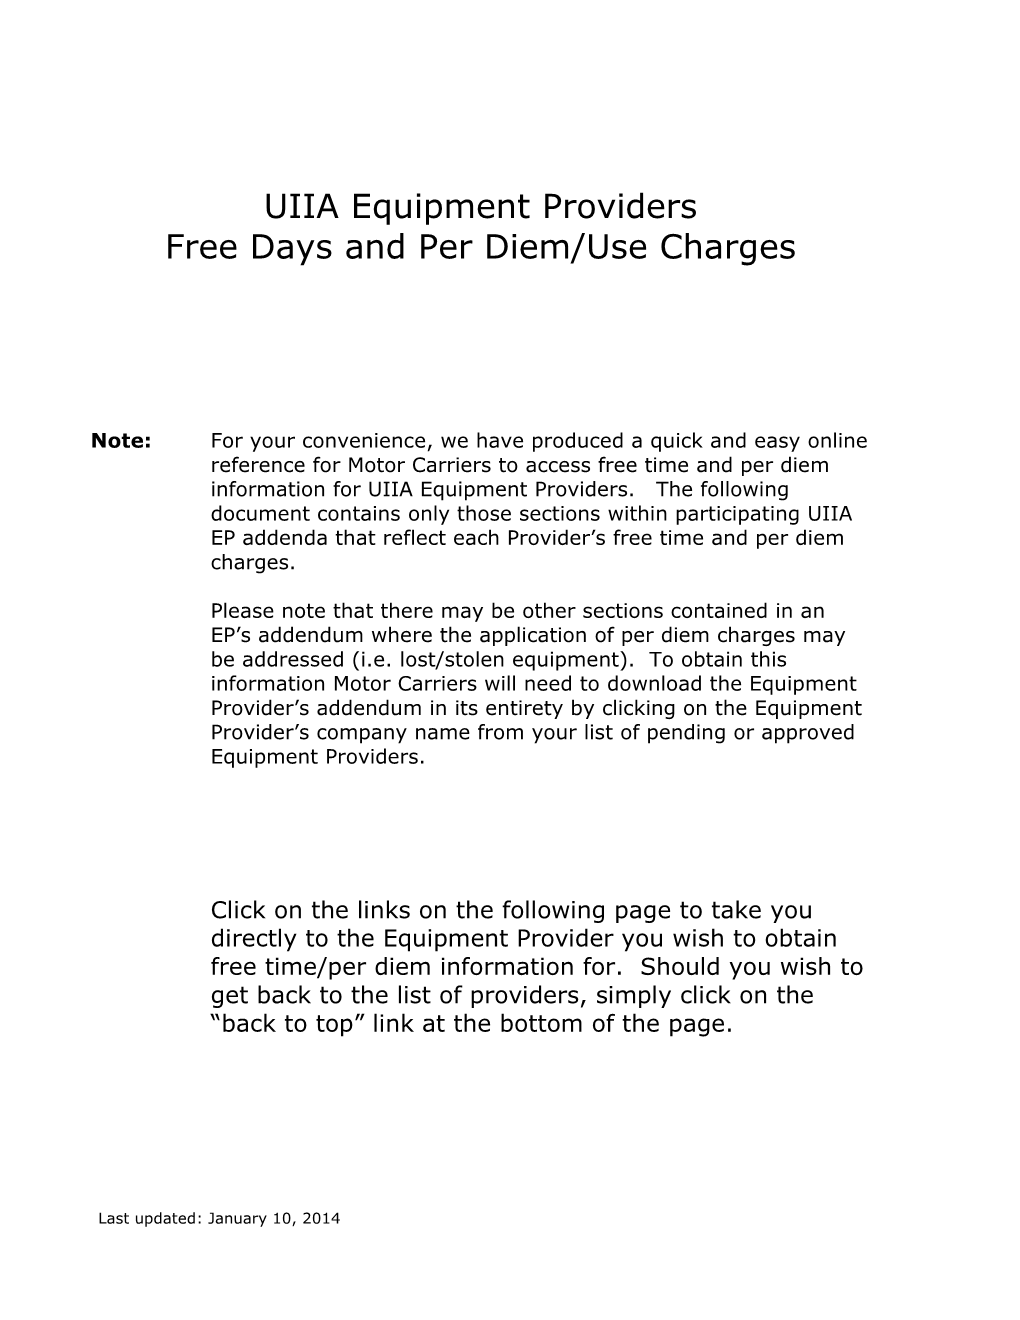 UIIA Equipment Providers Free Days and Per Diem/Use Charges